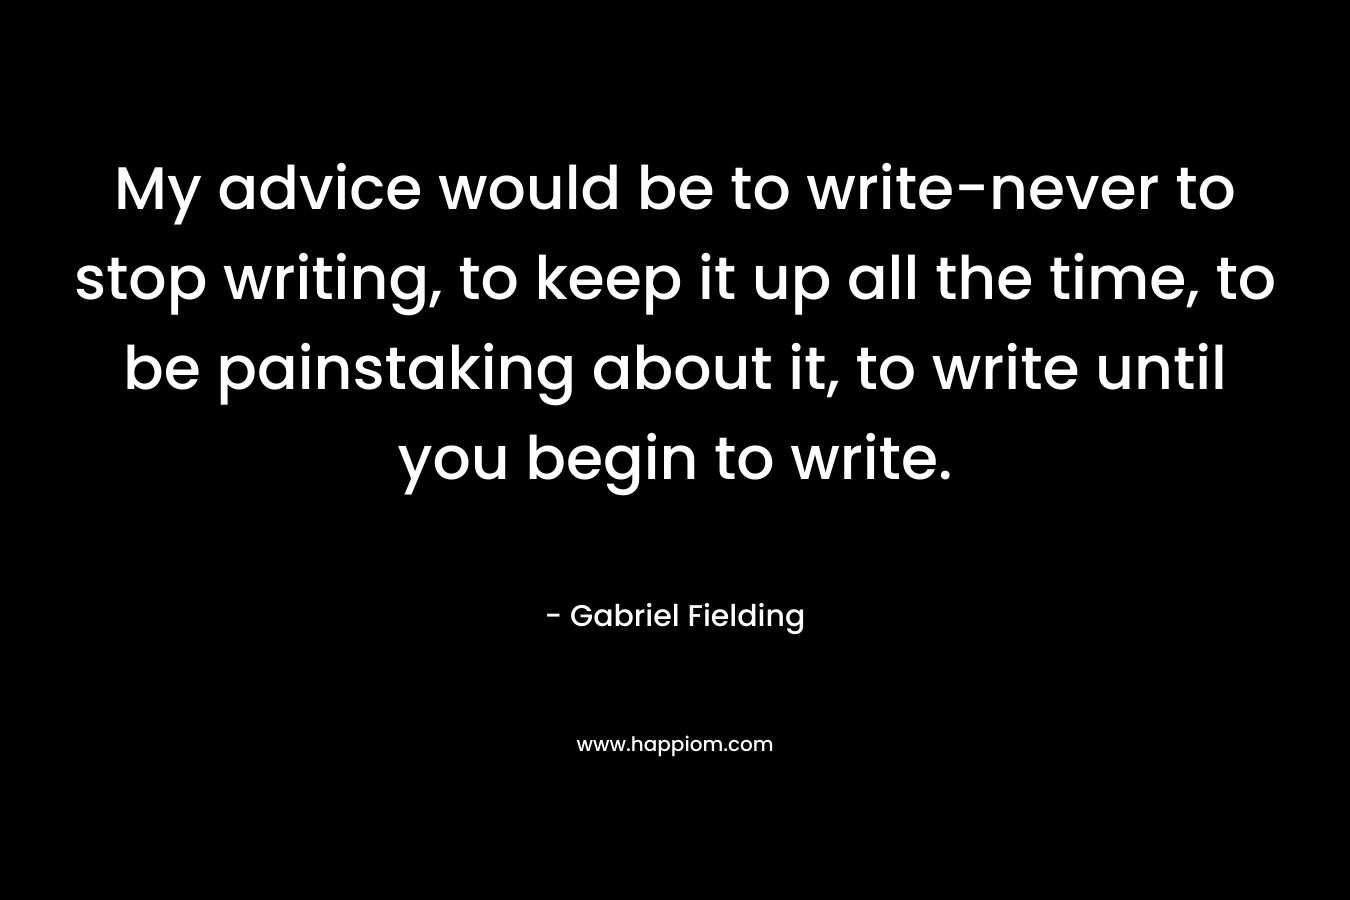 My advice would be to write-never to stop writing, to keep it up all the time, to be painstaking about it, to write until you begin to write.